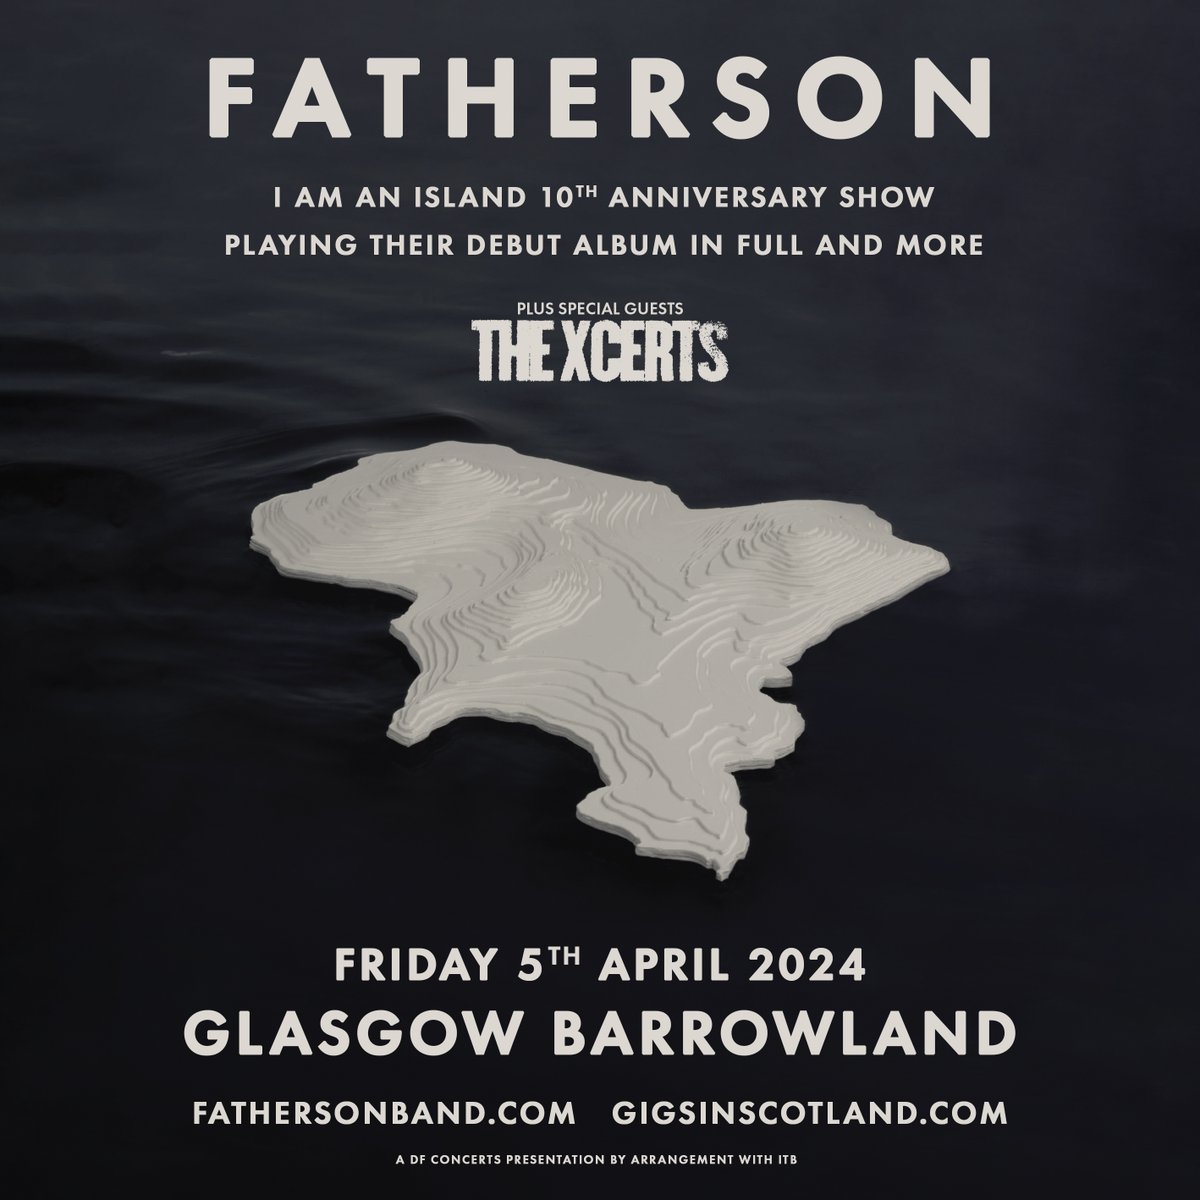 SUPPORT ADDED » @thexcerts will now be supporting @fathersonband at the @TheBarrowlands show on 5th April 2024 🔥 TICKETS ⇾ gigss.co/fatherson